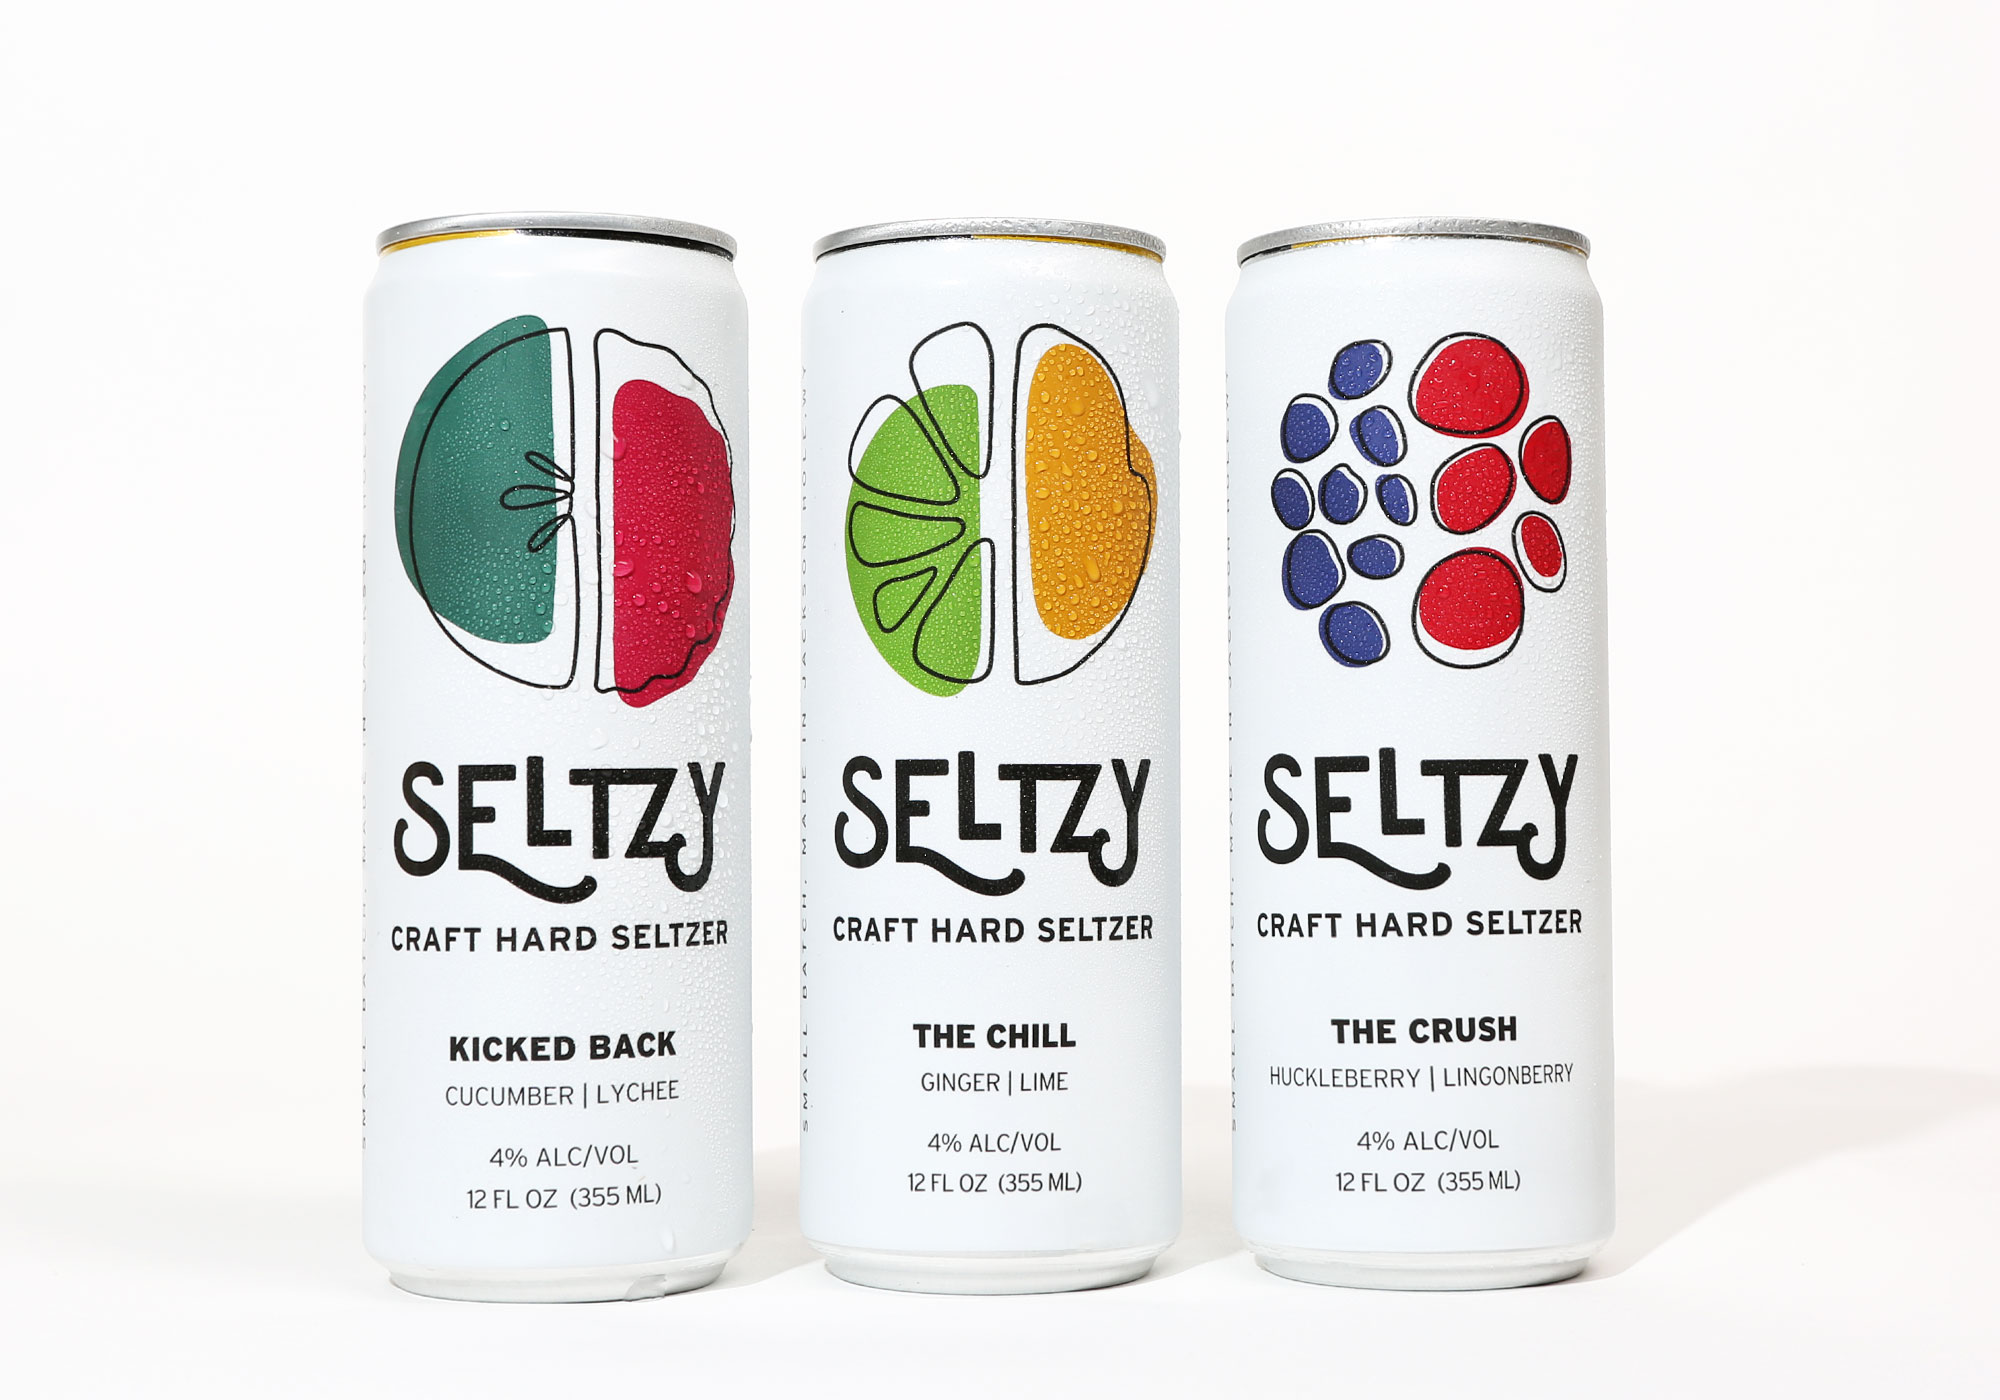 How Roadhouse Brewing Co.’s New Seltzy Launch Is Redefining the Hard Seltzer Game